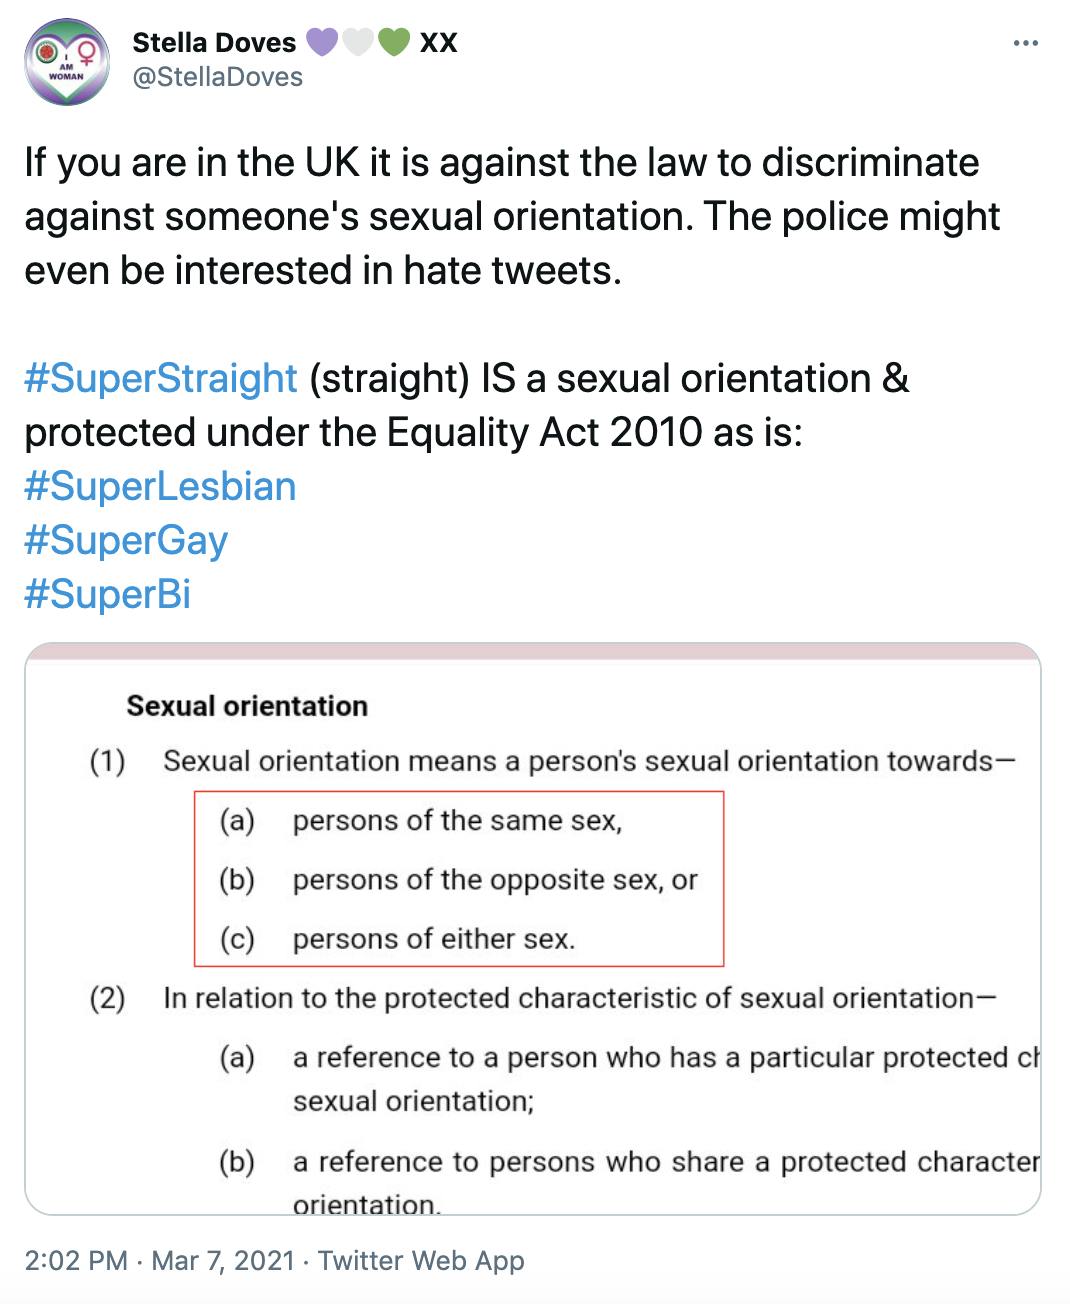 'If you are in the UK it is against the law to discriminate against someone's sexual orientation. The police might even be interested in hate tweets. #SuperStraight (straight) IS a sexual orientation & protected under the Equality Act 2010 as is: #SuperLesbian #SuperGay #SuperBi'